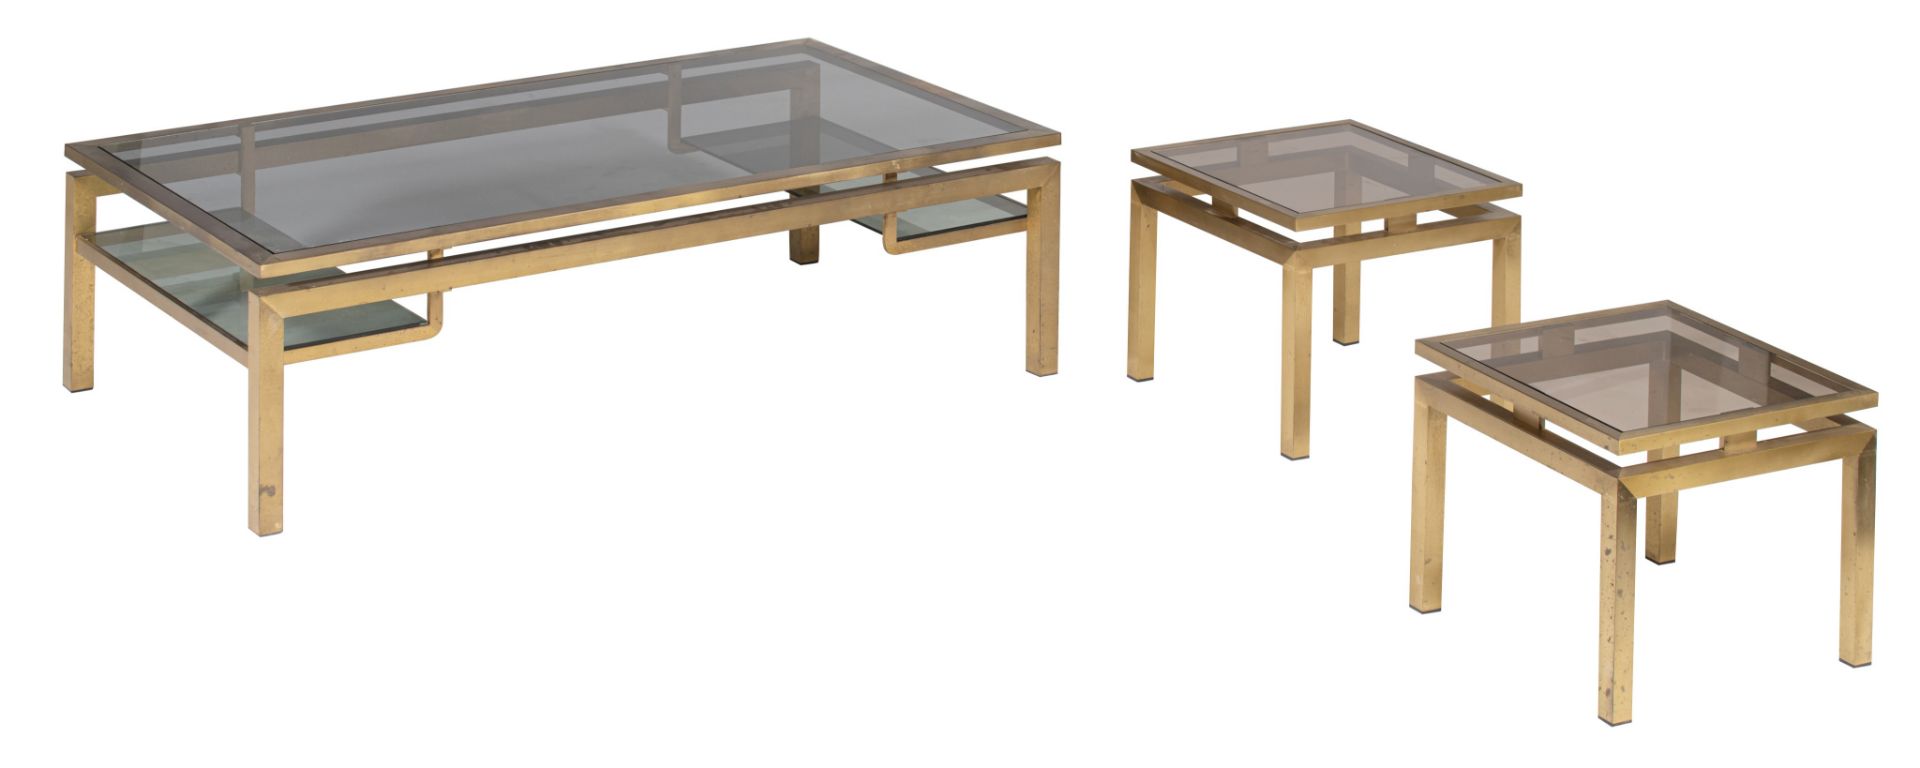 A vintage coffee table and two matching side tables by Maison Jansen, Paris, H 36-38 - W 40-138 - 40